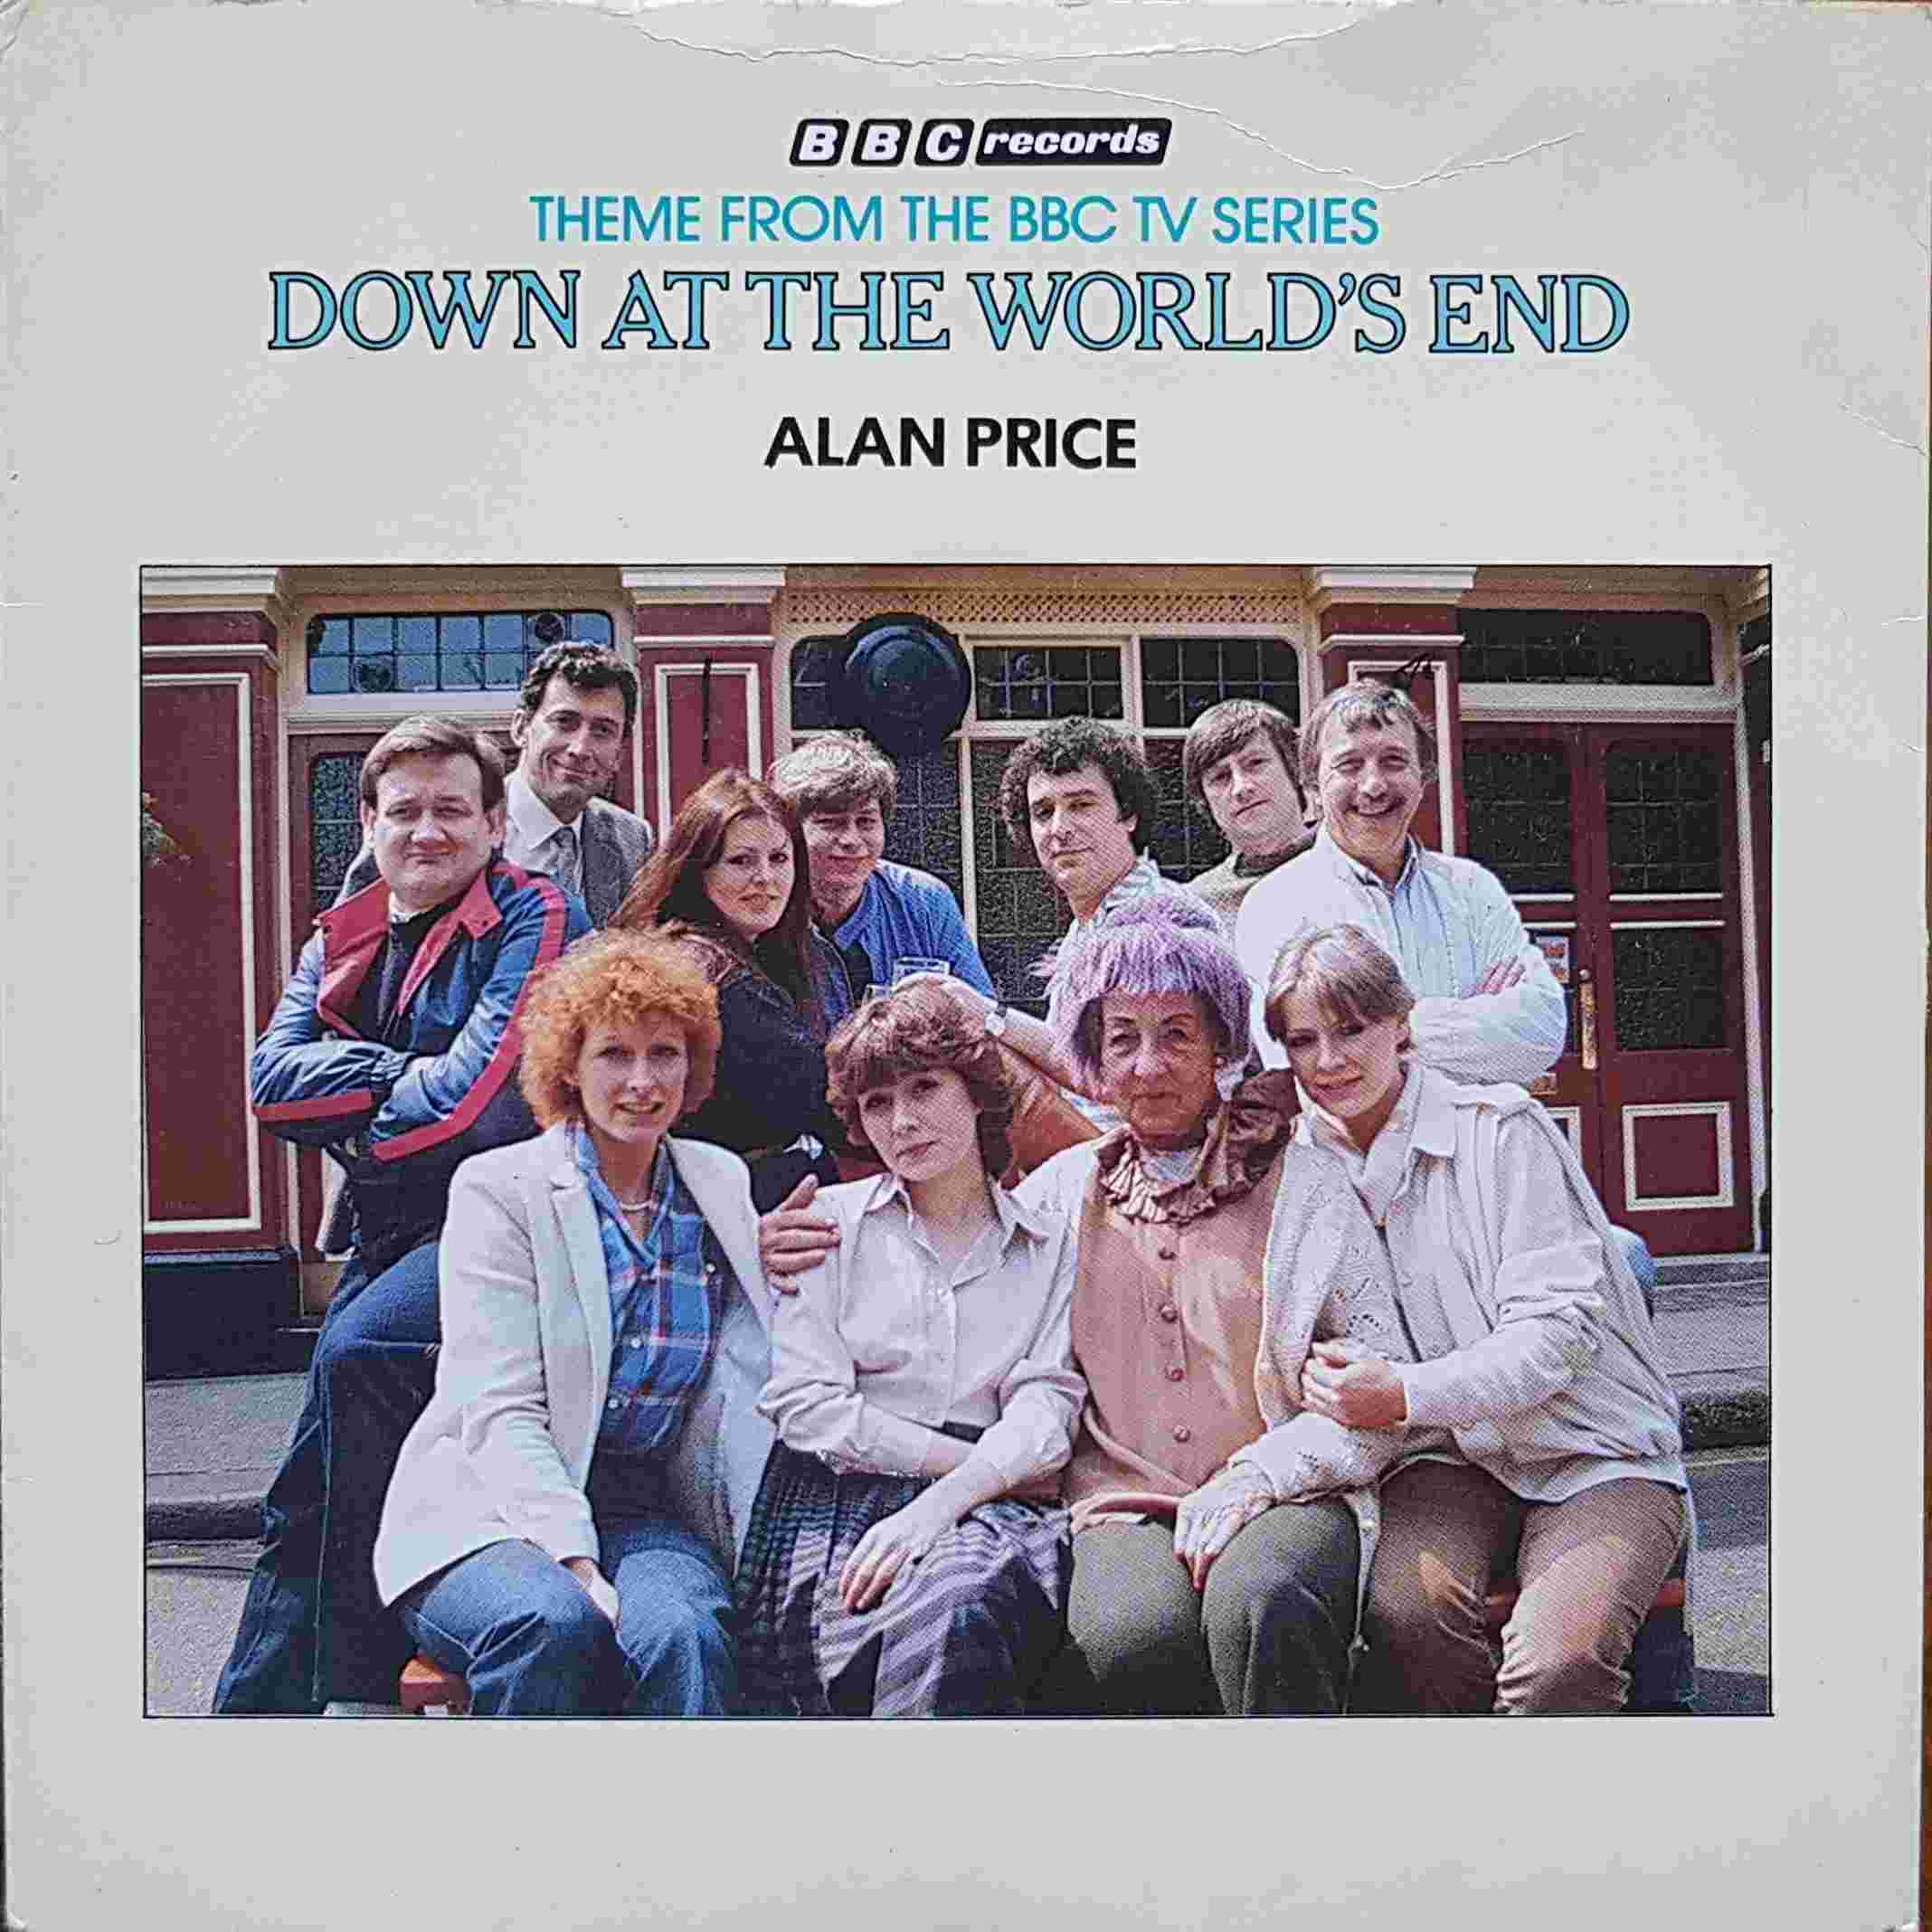 Picture of RESL 100 Down at the World's End (World's End) by artist Alan Price from the BBC singles - Records and Tapes library